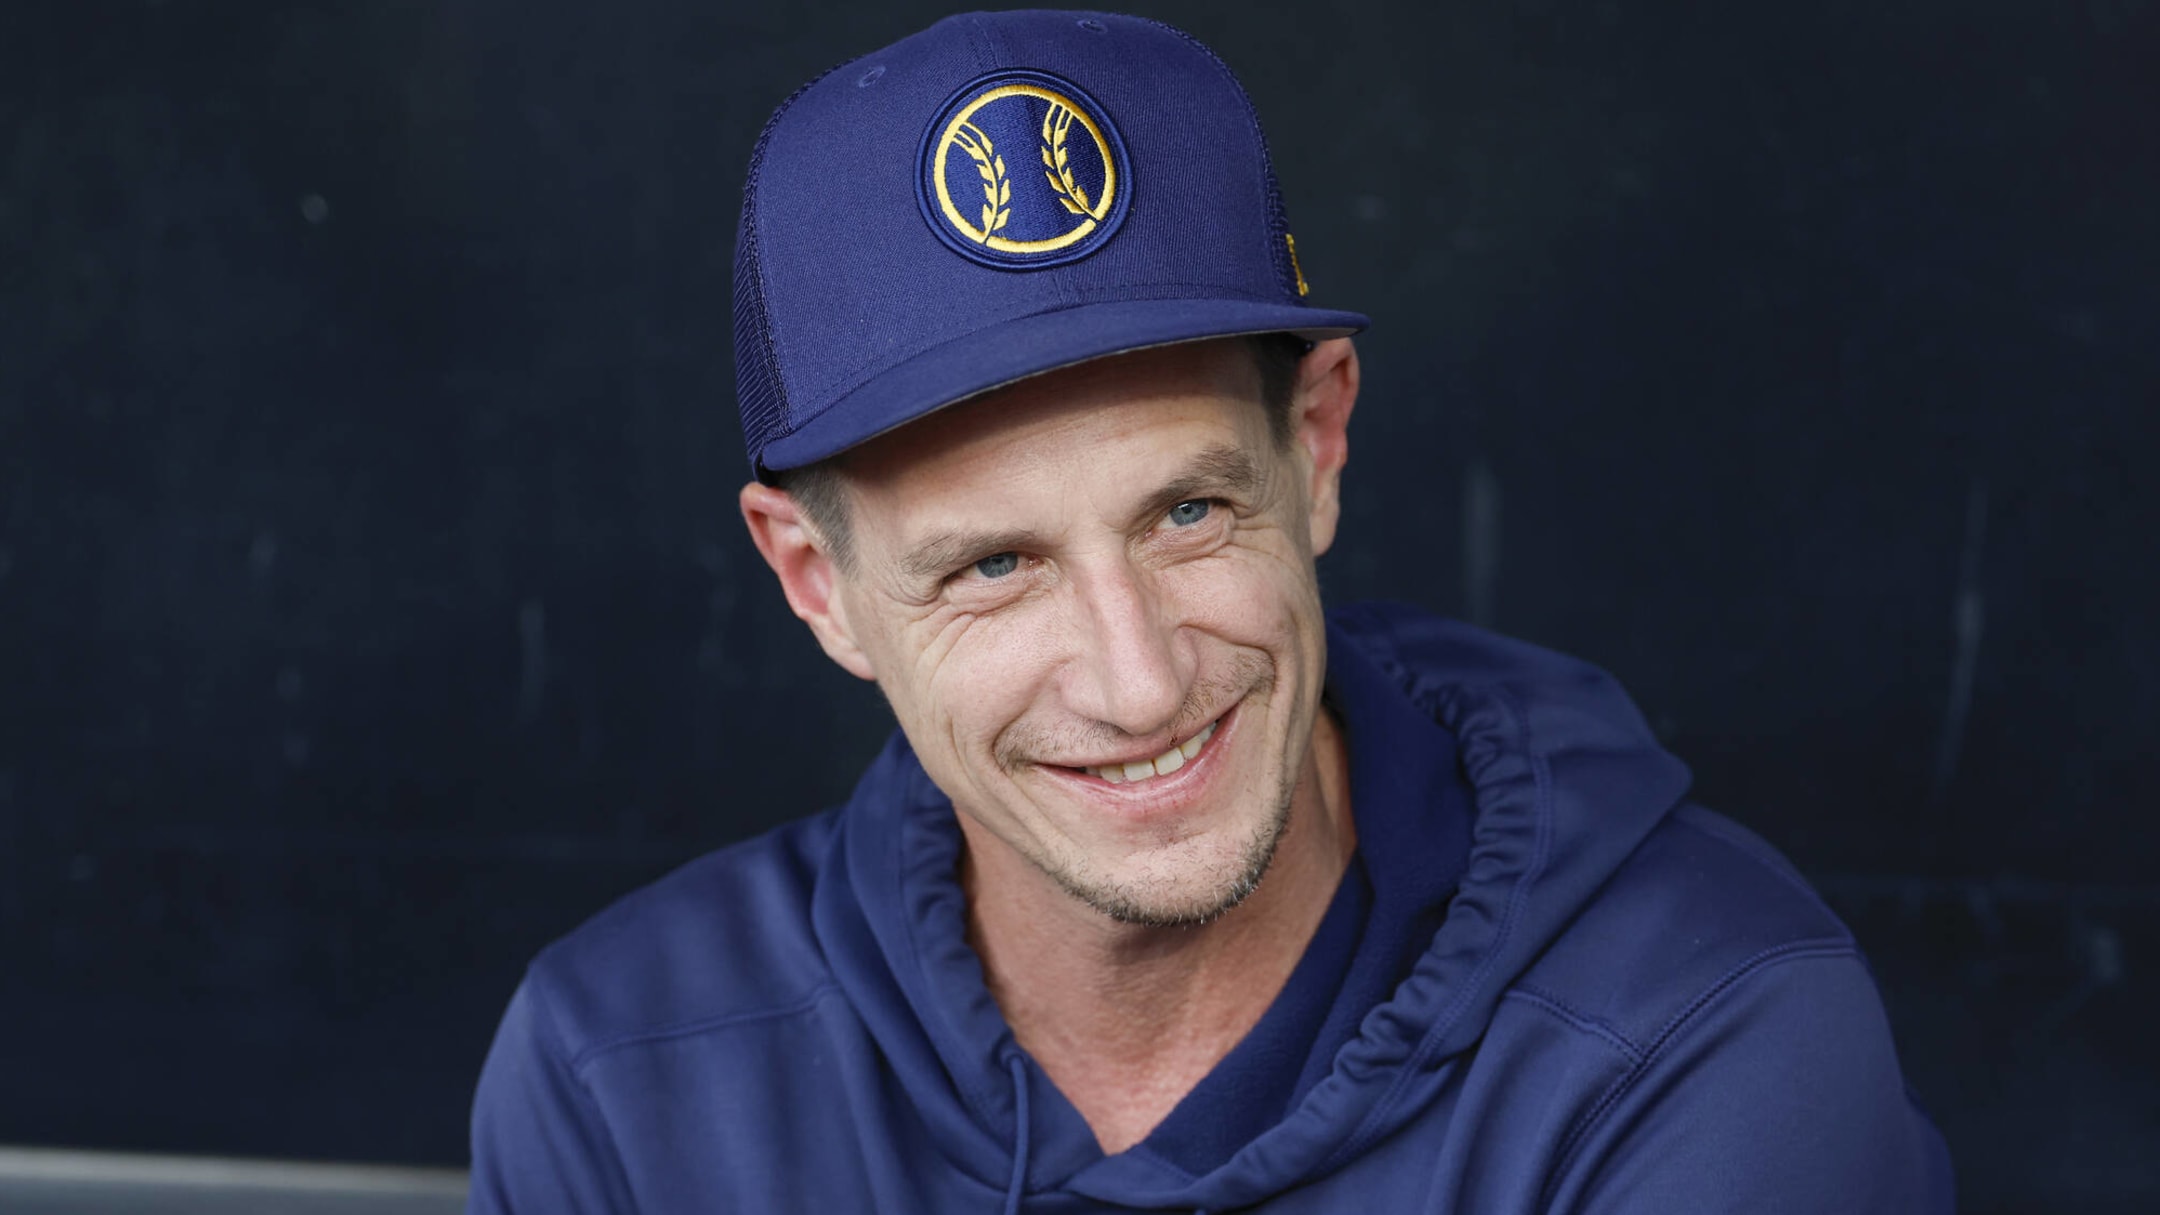 One MLB Insider spills end of season plans regarding manager Craig Counsell